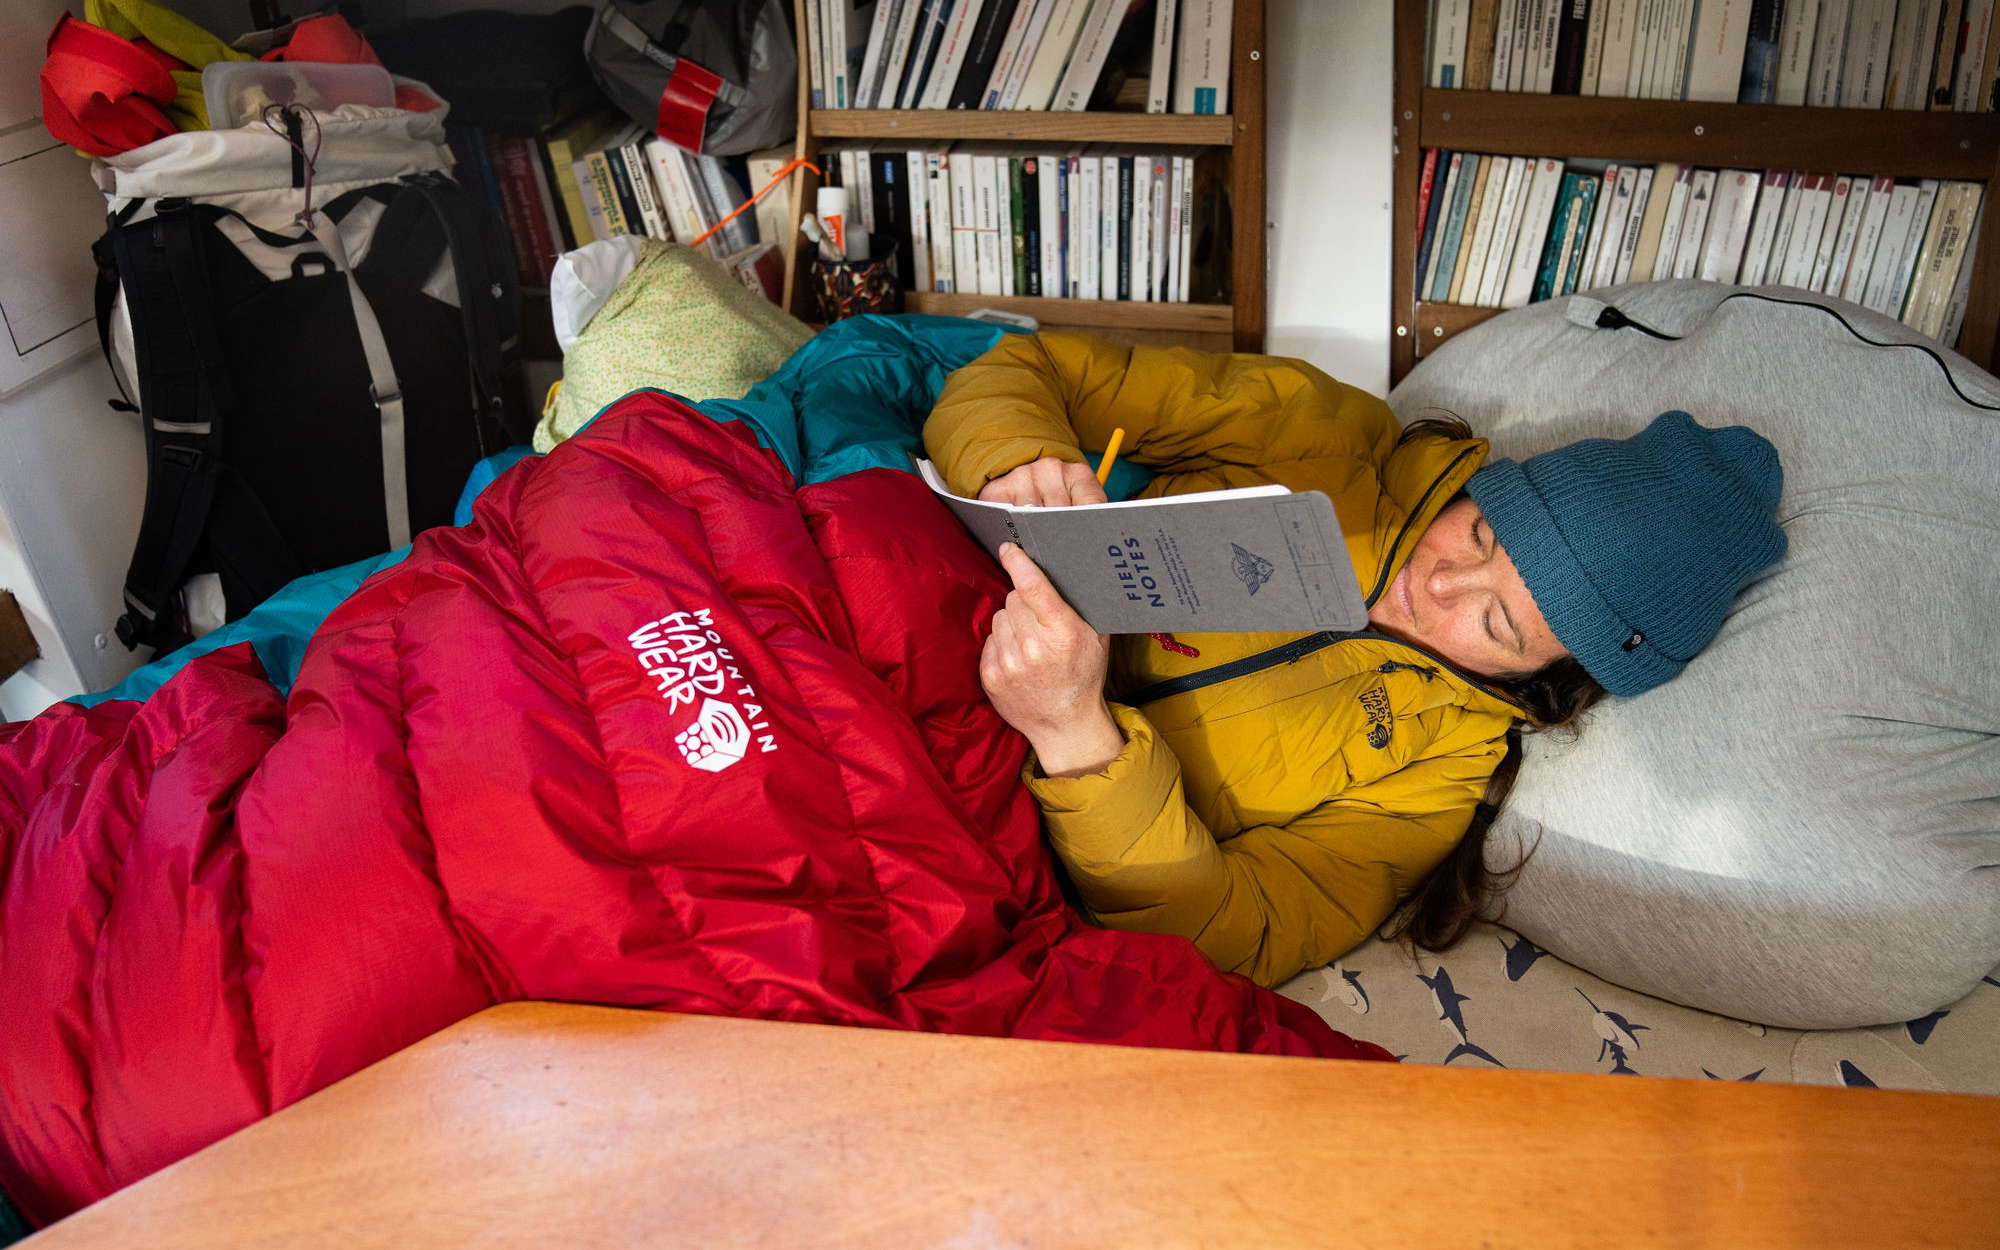 Downtime in the sailboat: Rachael is cozied up in the phantom sleeping bag while journaling.